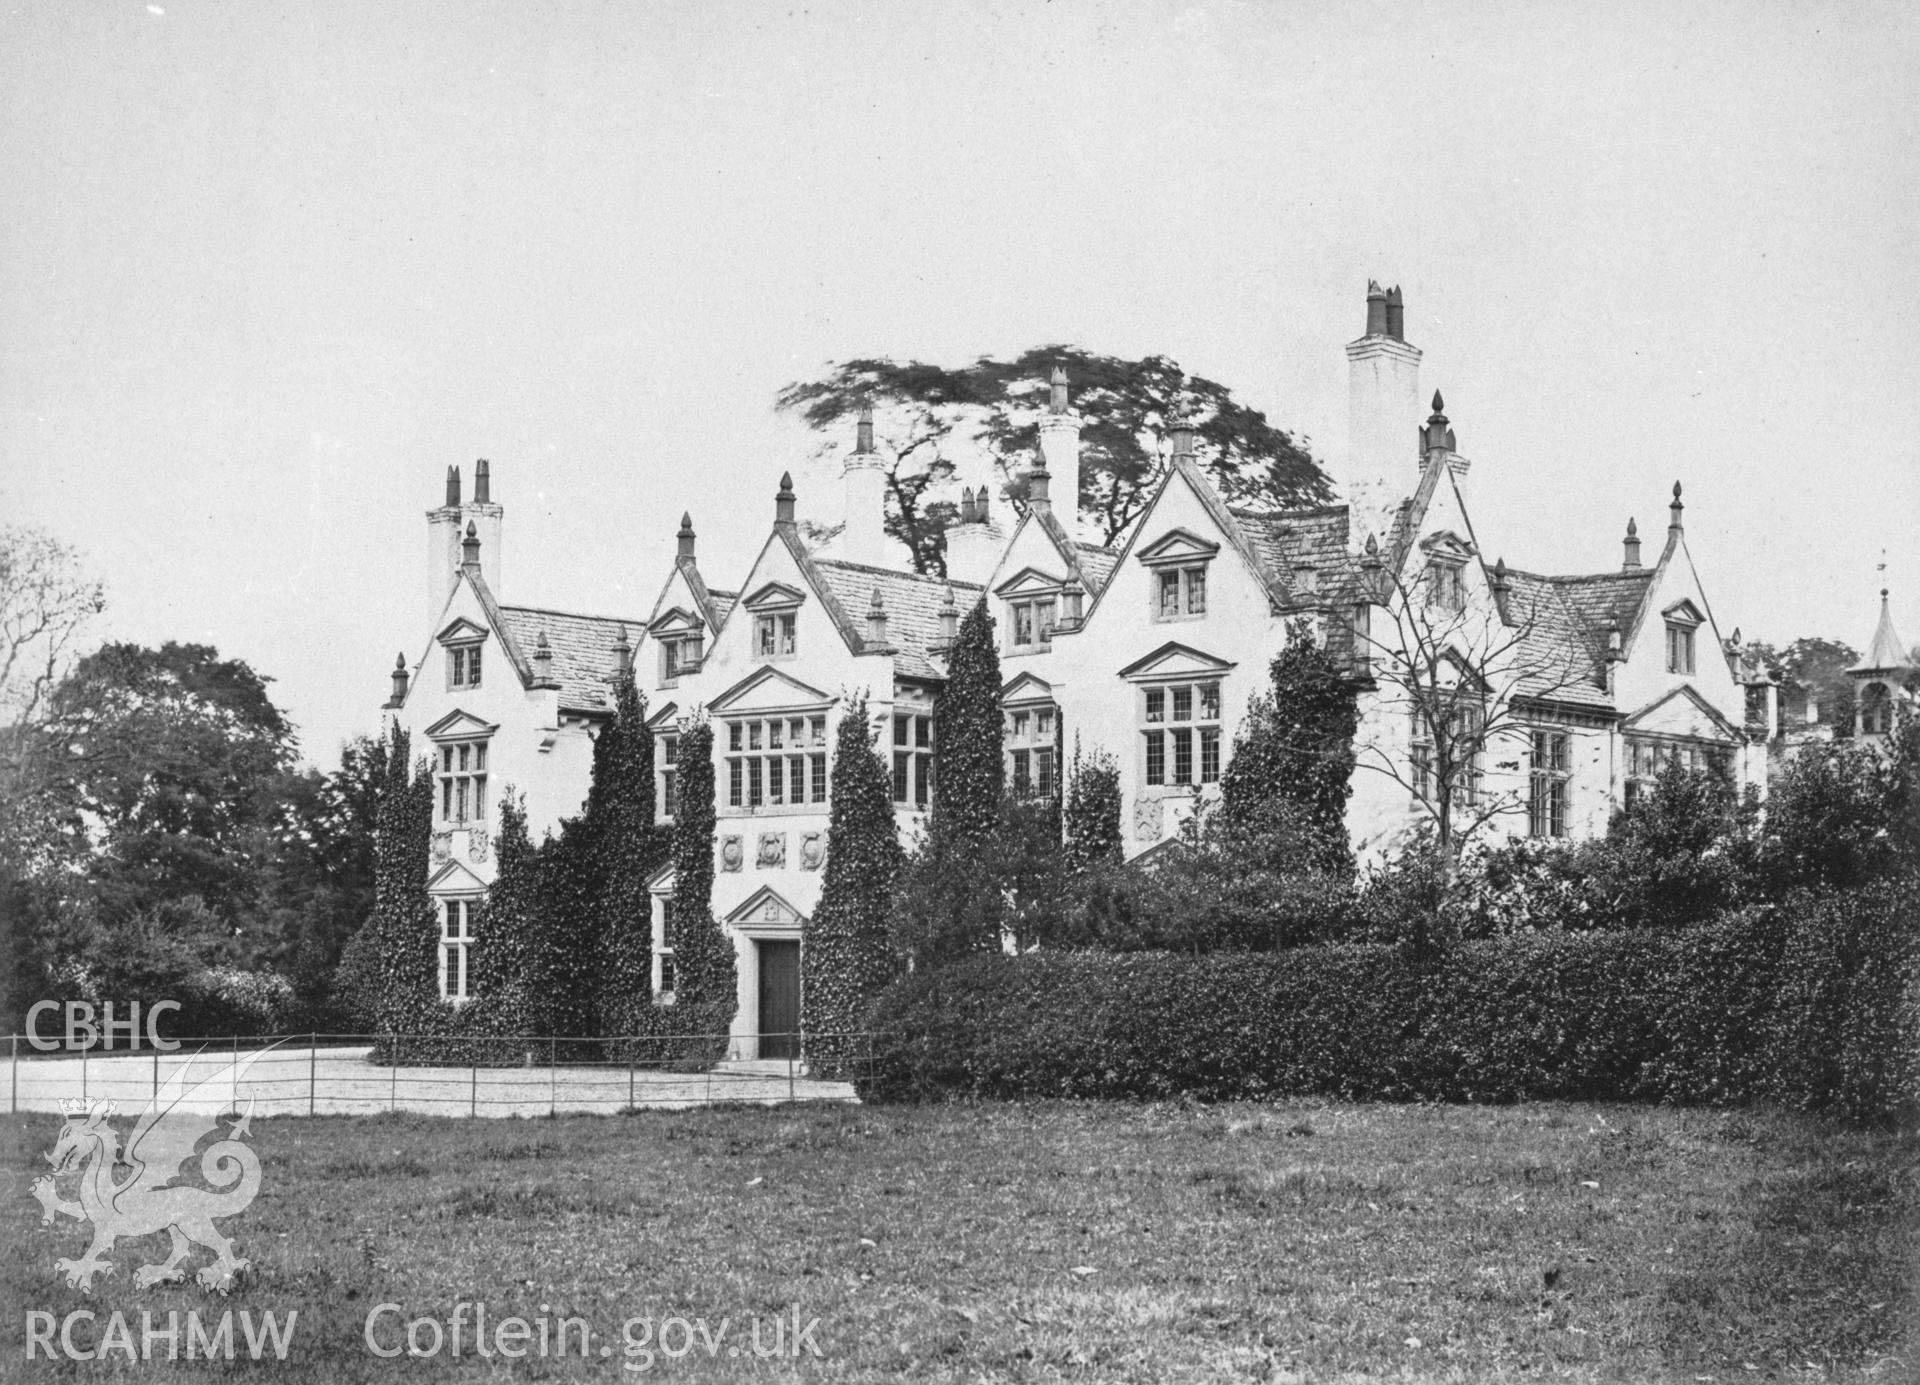 Digital copy of a view of Trevalyn Hall.